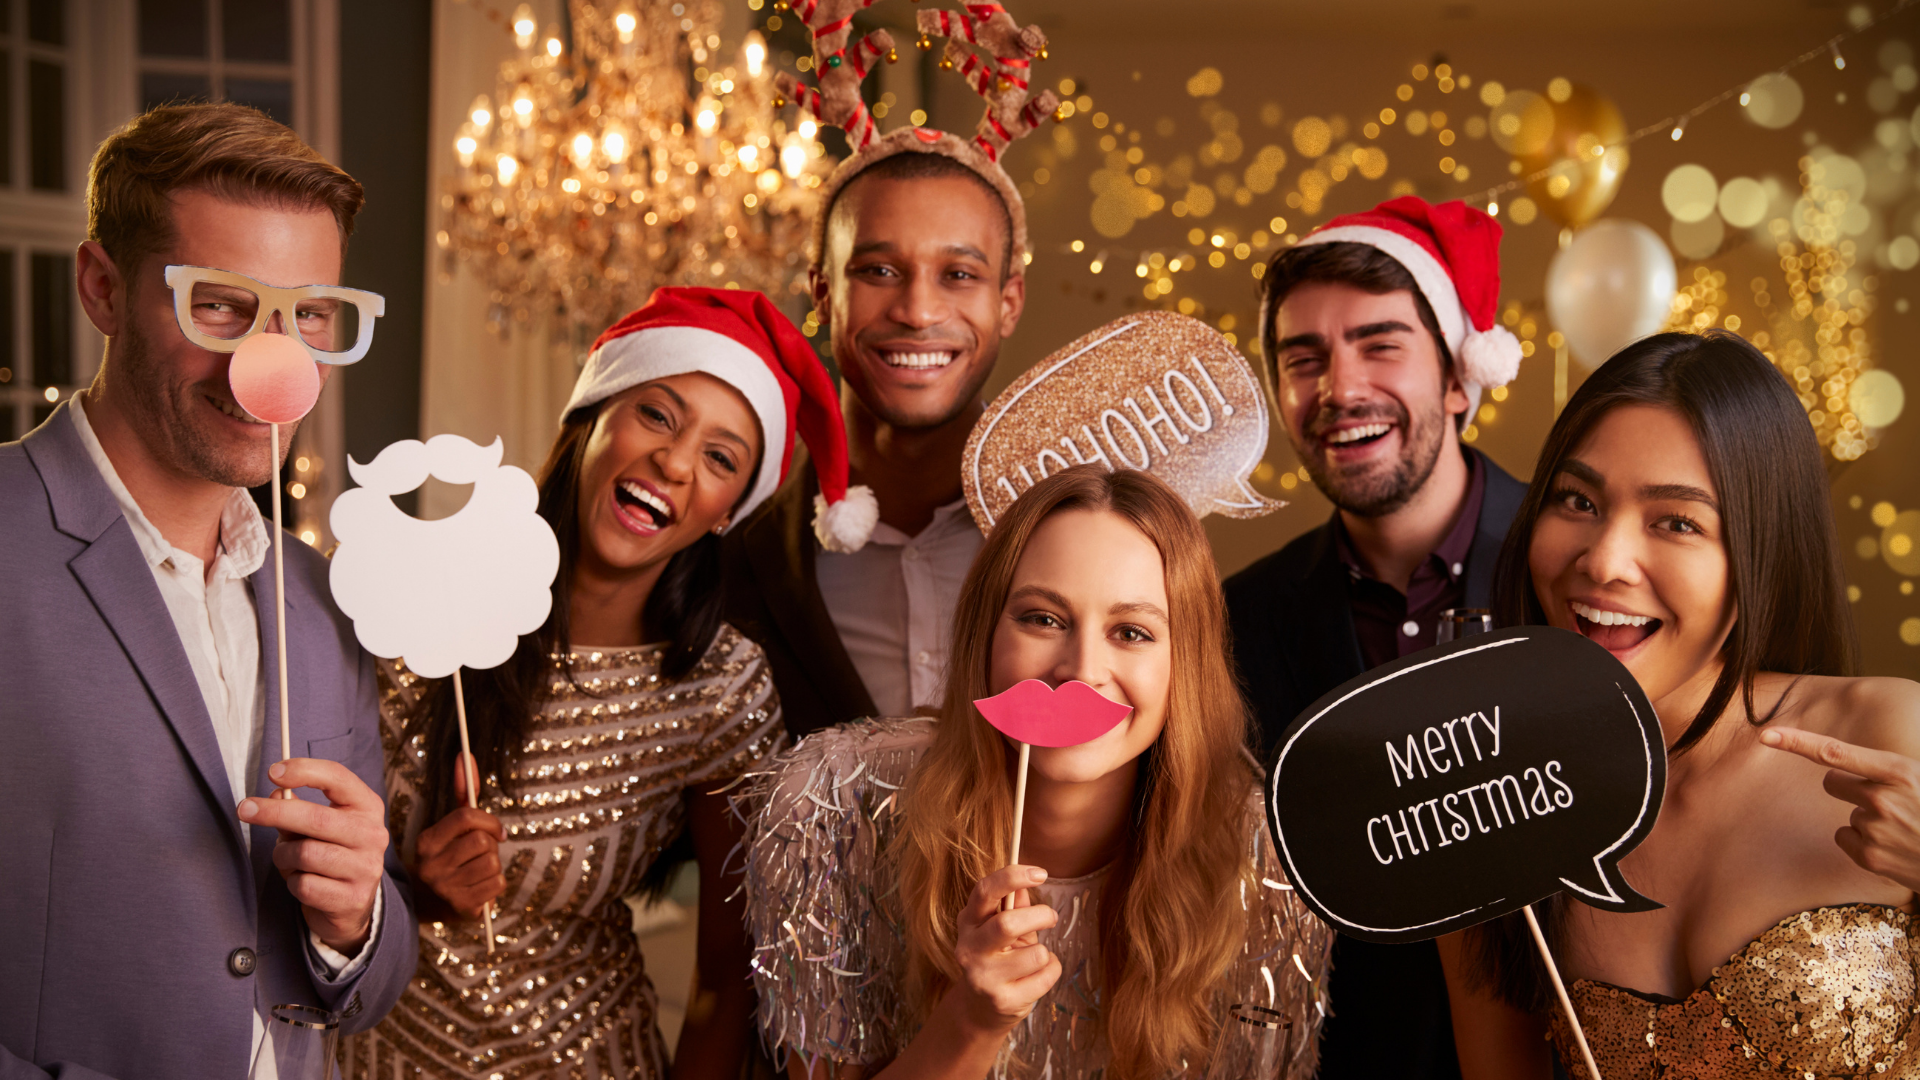 6 virtual Christmas party ideas that are actually good